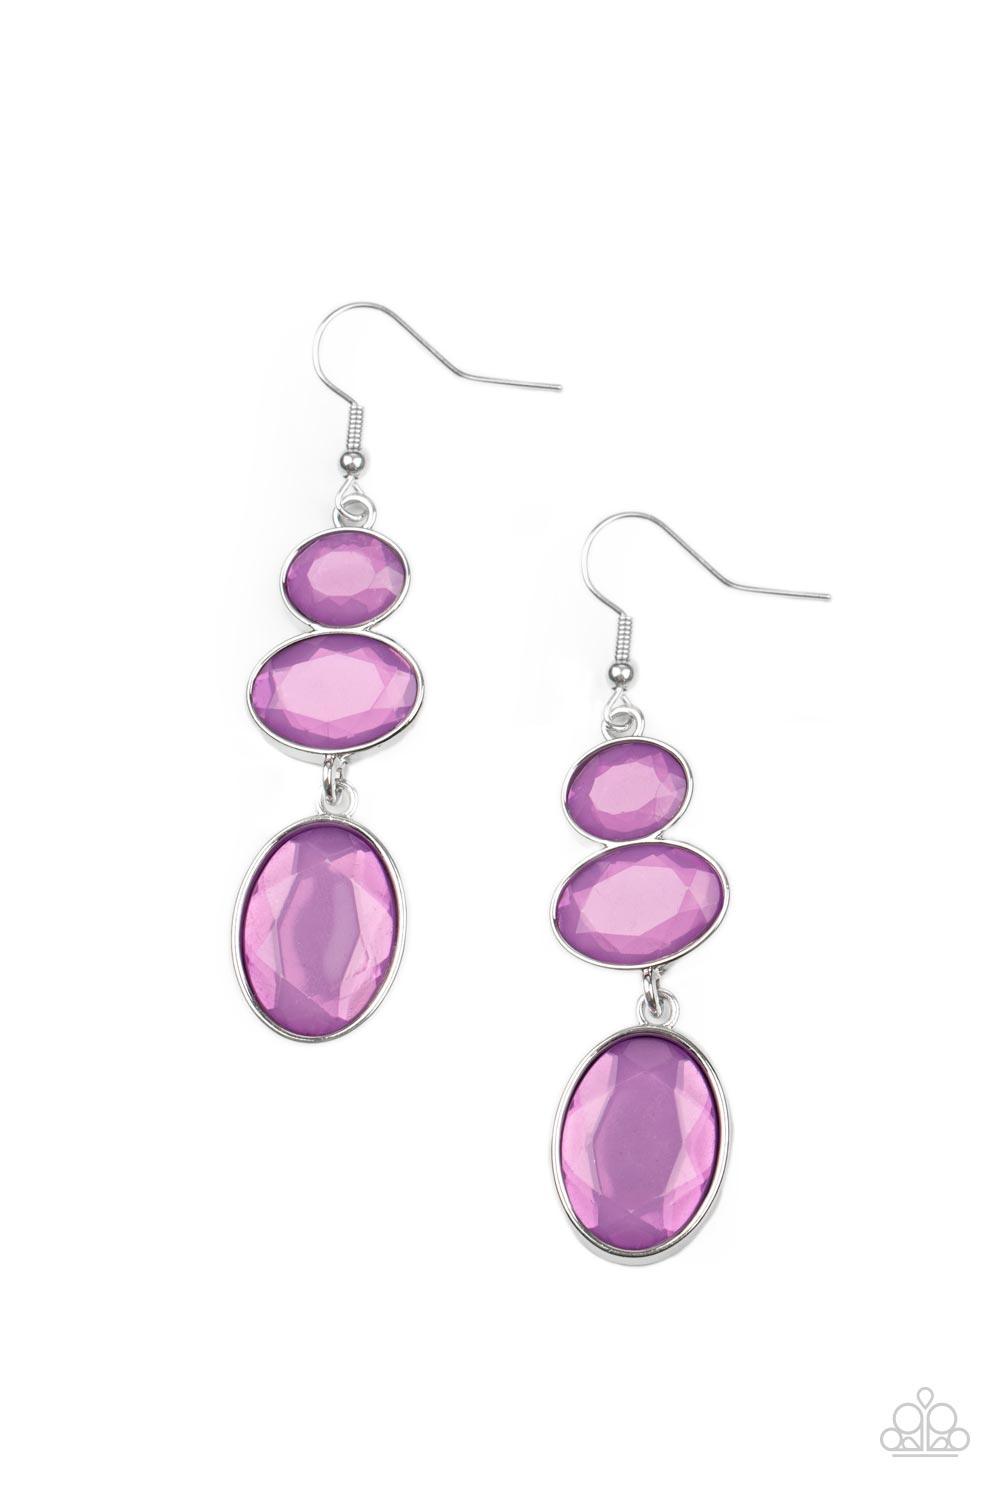 Paparazzi Accessories Tiers Of Tranquility - Purple Gradually increasing in size, dewy Amethyst Orchid oval gems trickle from the ear, linking into an ethereal lure. Earring attaches to a standard fishhook fitting. Sold as one pair of earrings. Jewelry